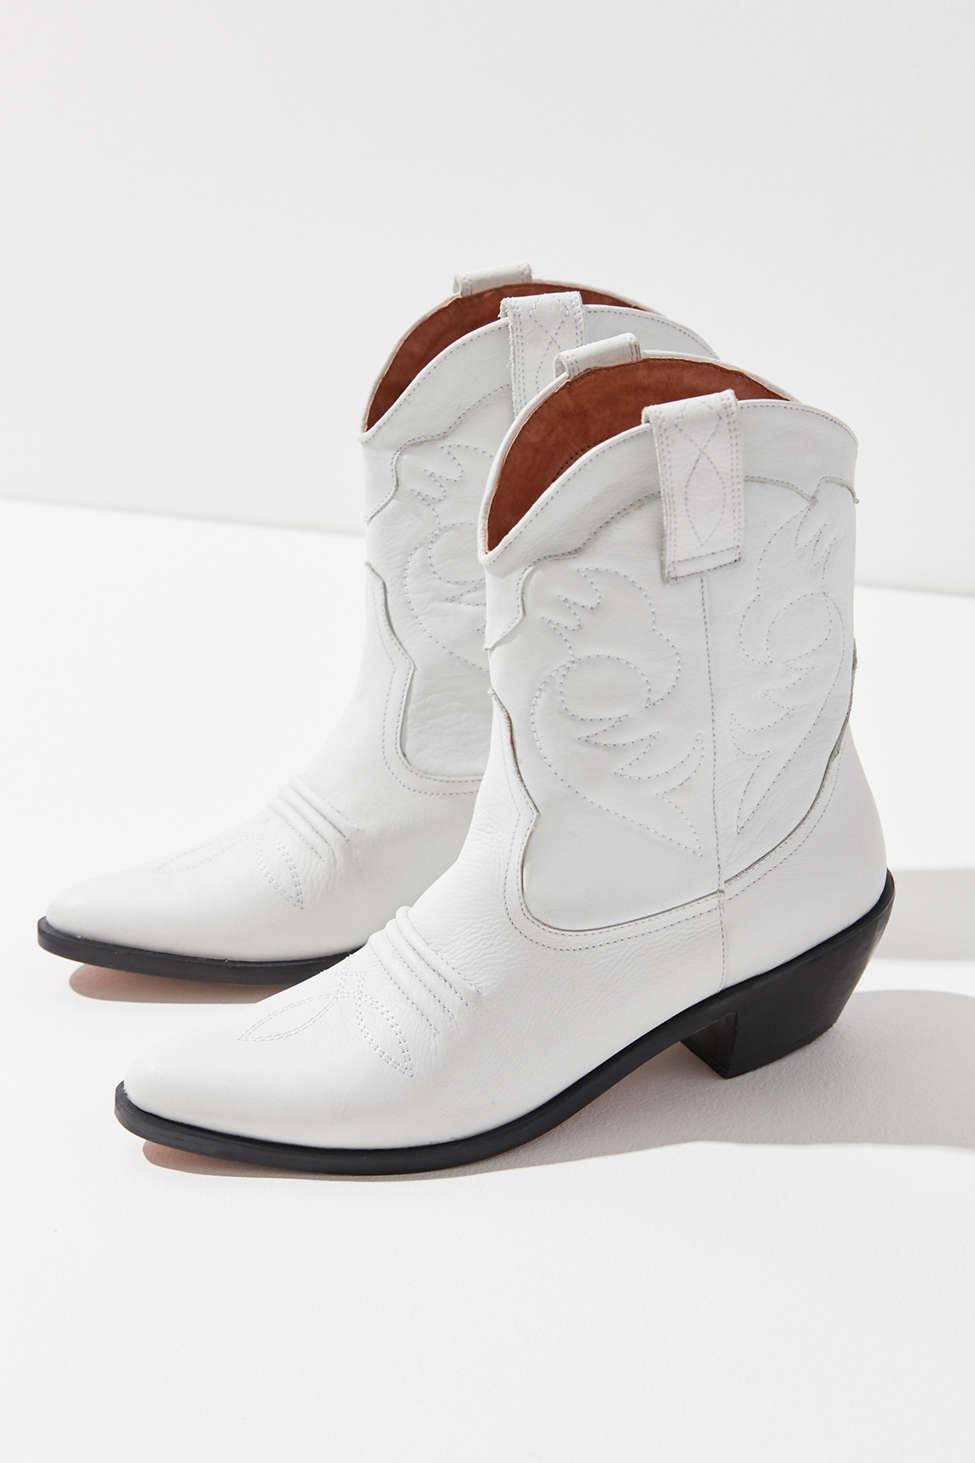 Urban Outfitters Uo Lynn Cowboy Boot - Lyst